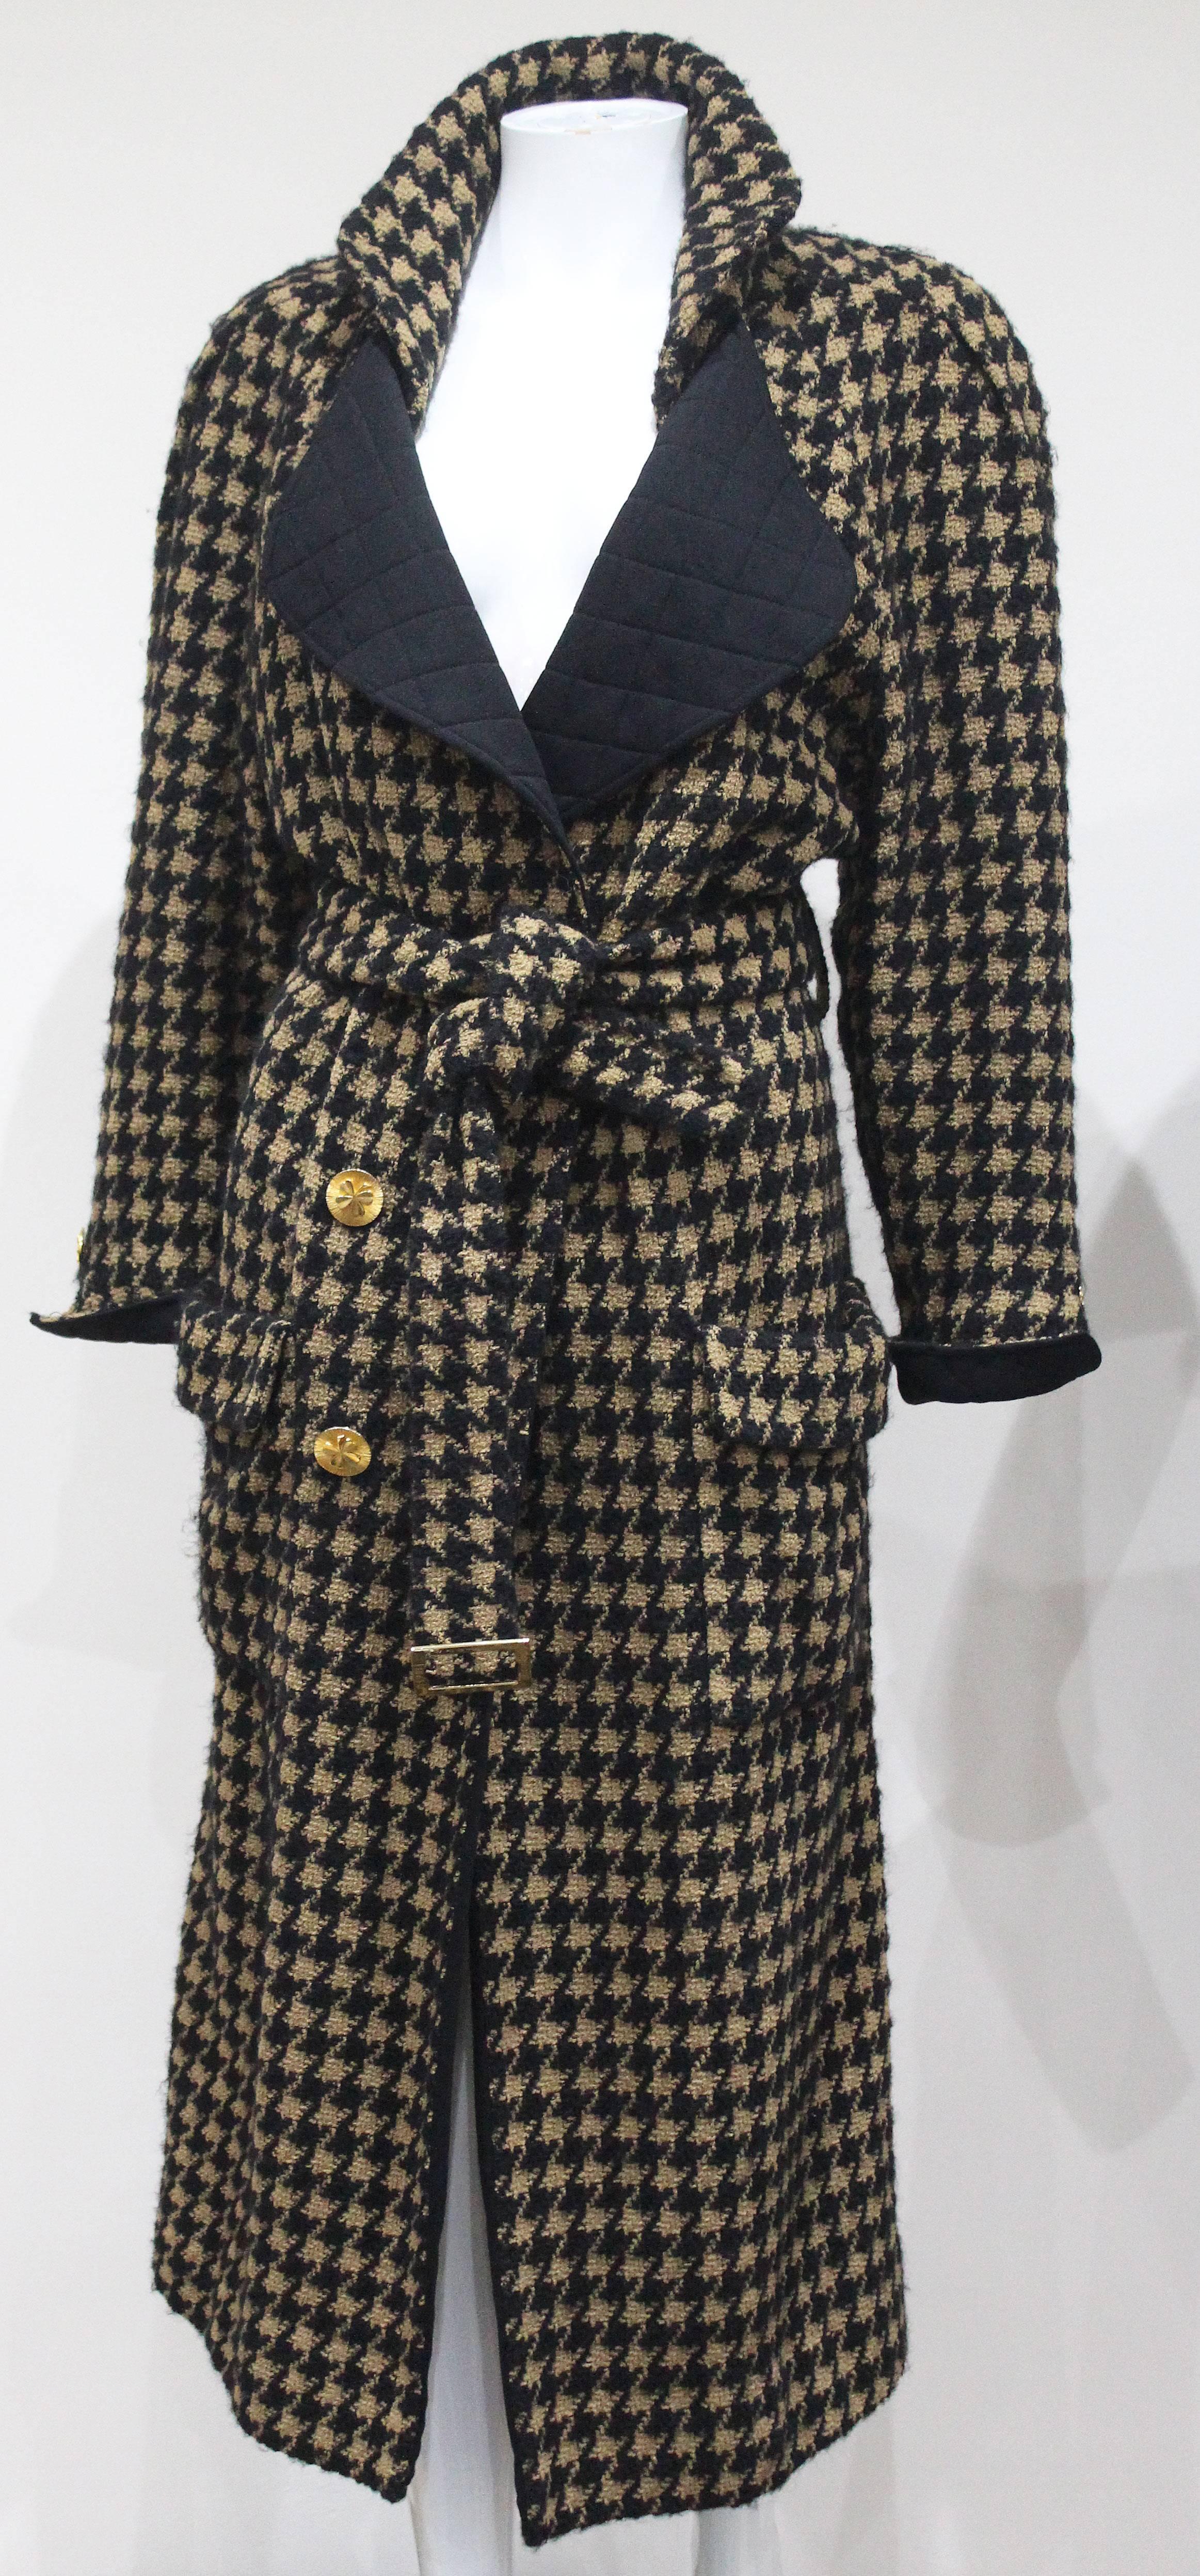 A 1980s Chanel tweed coat in a houndstooth print with quilted black collar and cuffs, gold tone Chanel buttons and matching fabric belt with gold tone Chanel stamped buckle. 

Size: Approx. Fr 38 - 40 